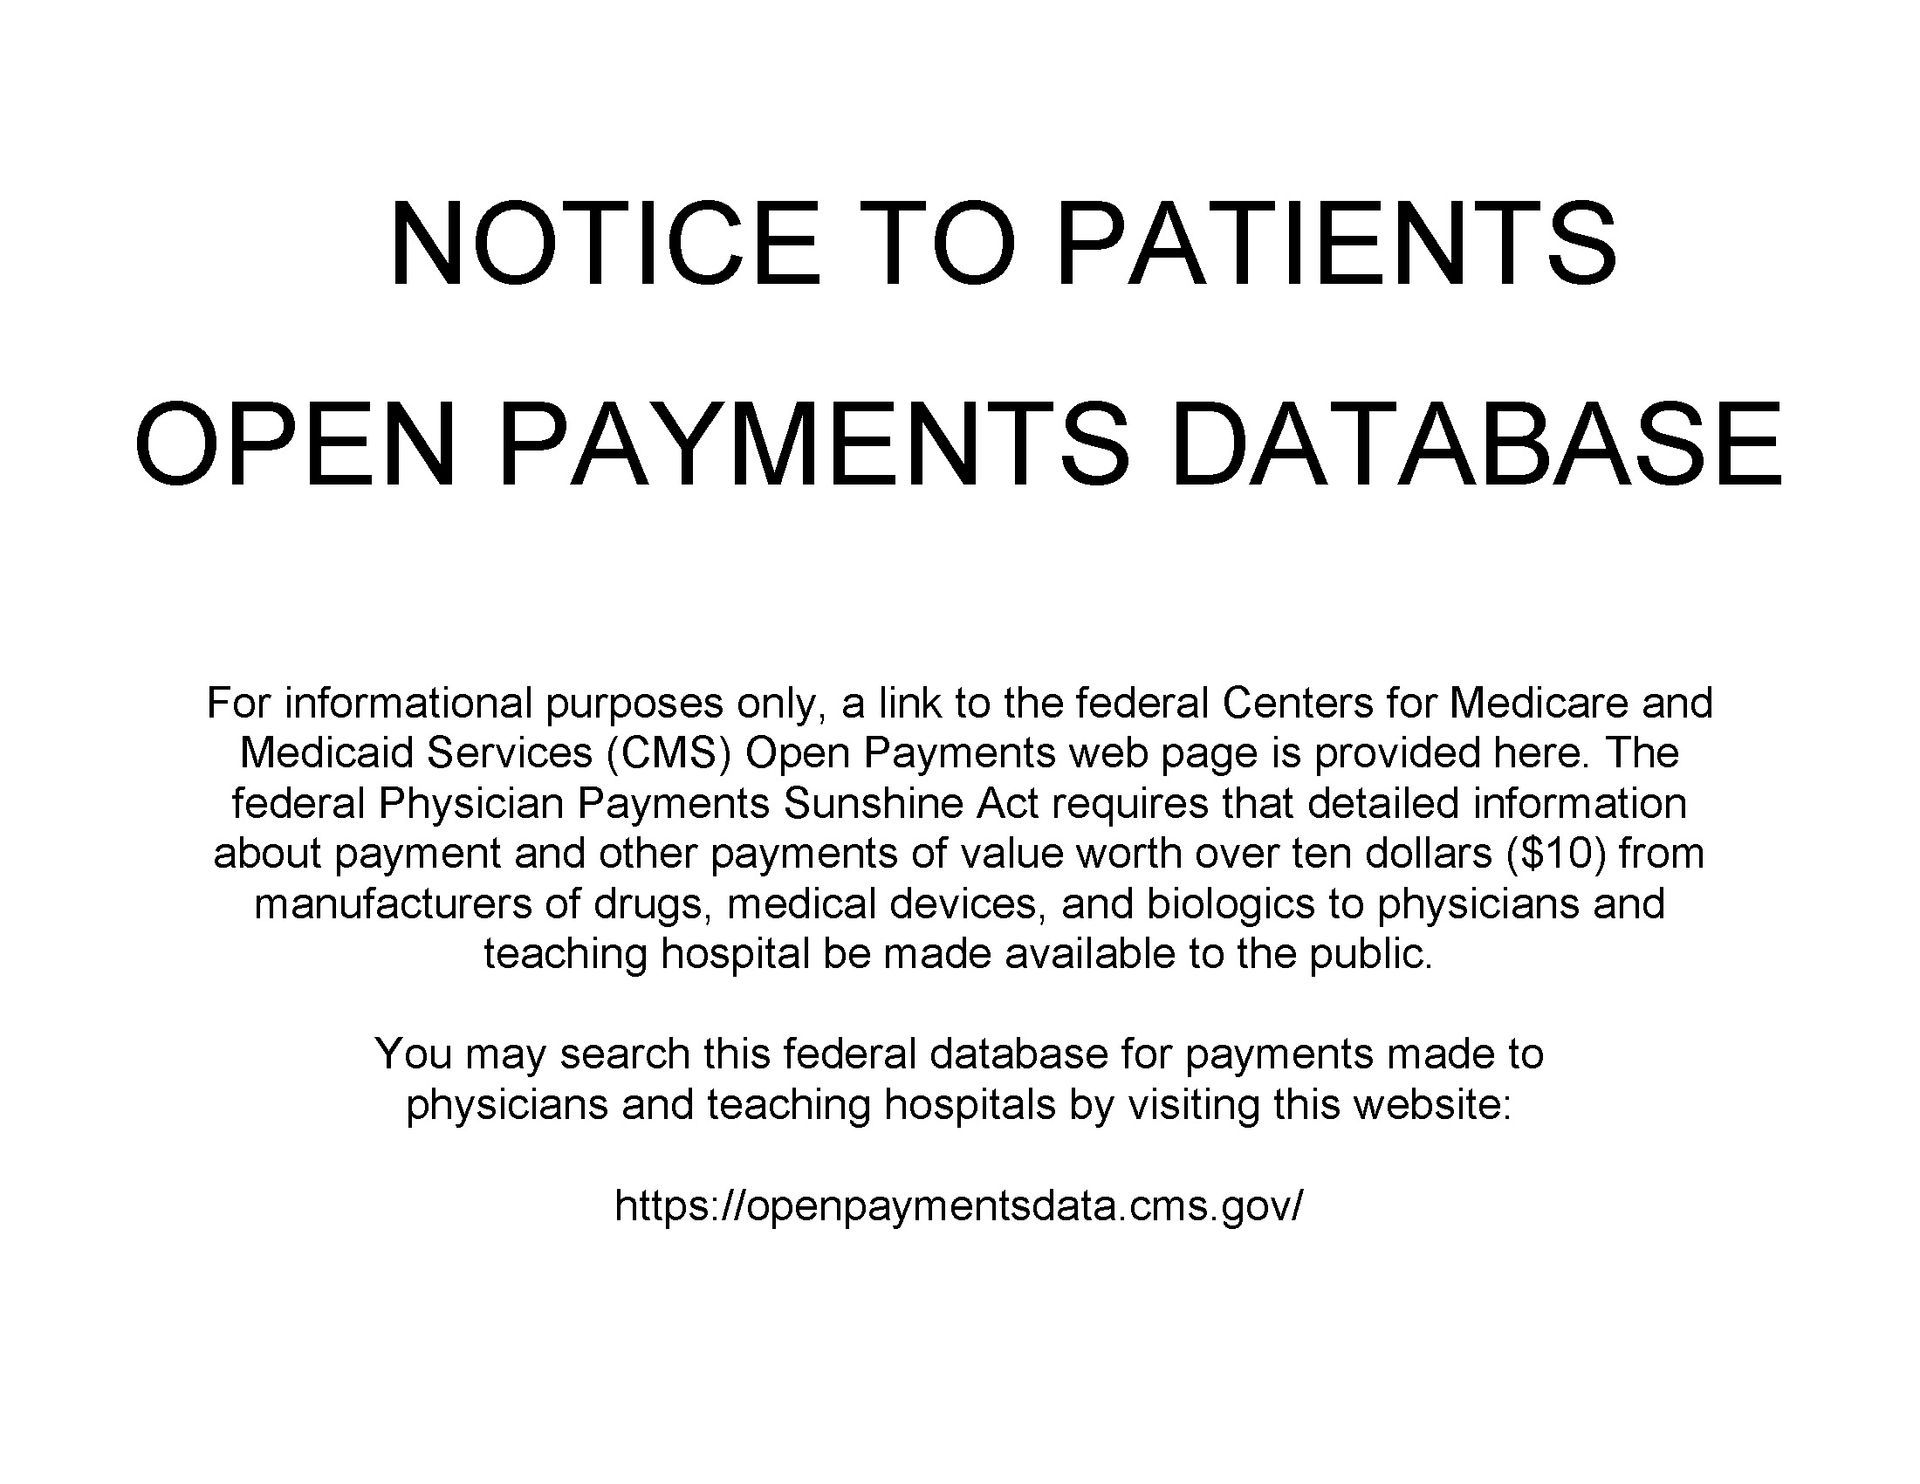 NOTICE TO PATIENTS OPEN PAYMENTS DATABASE